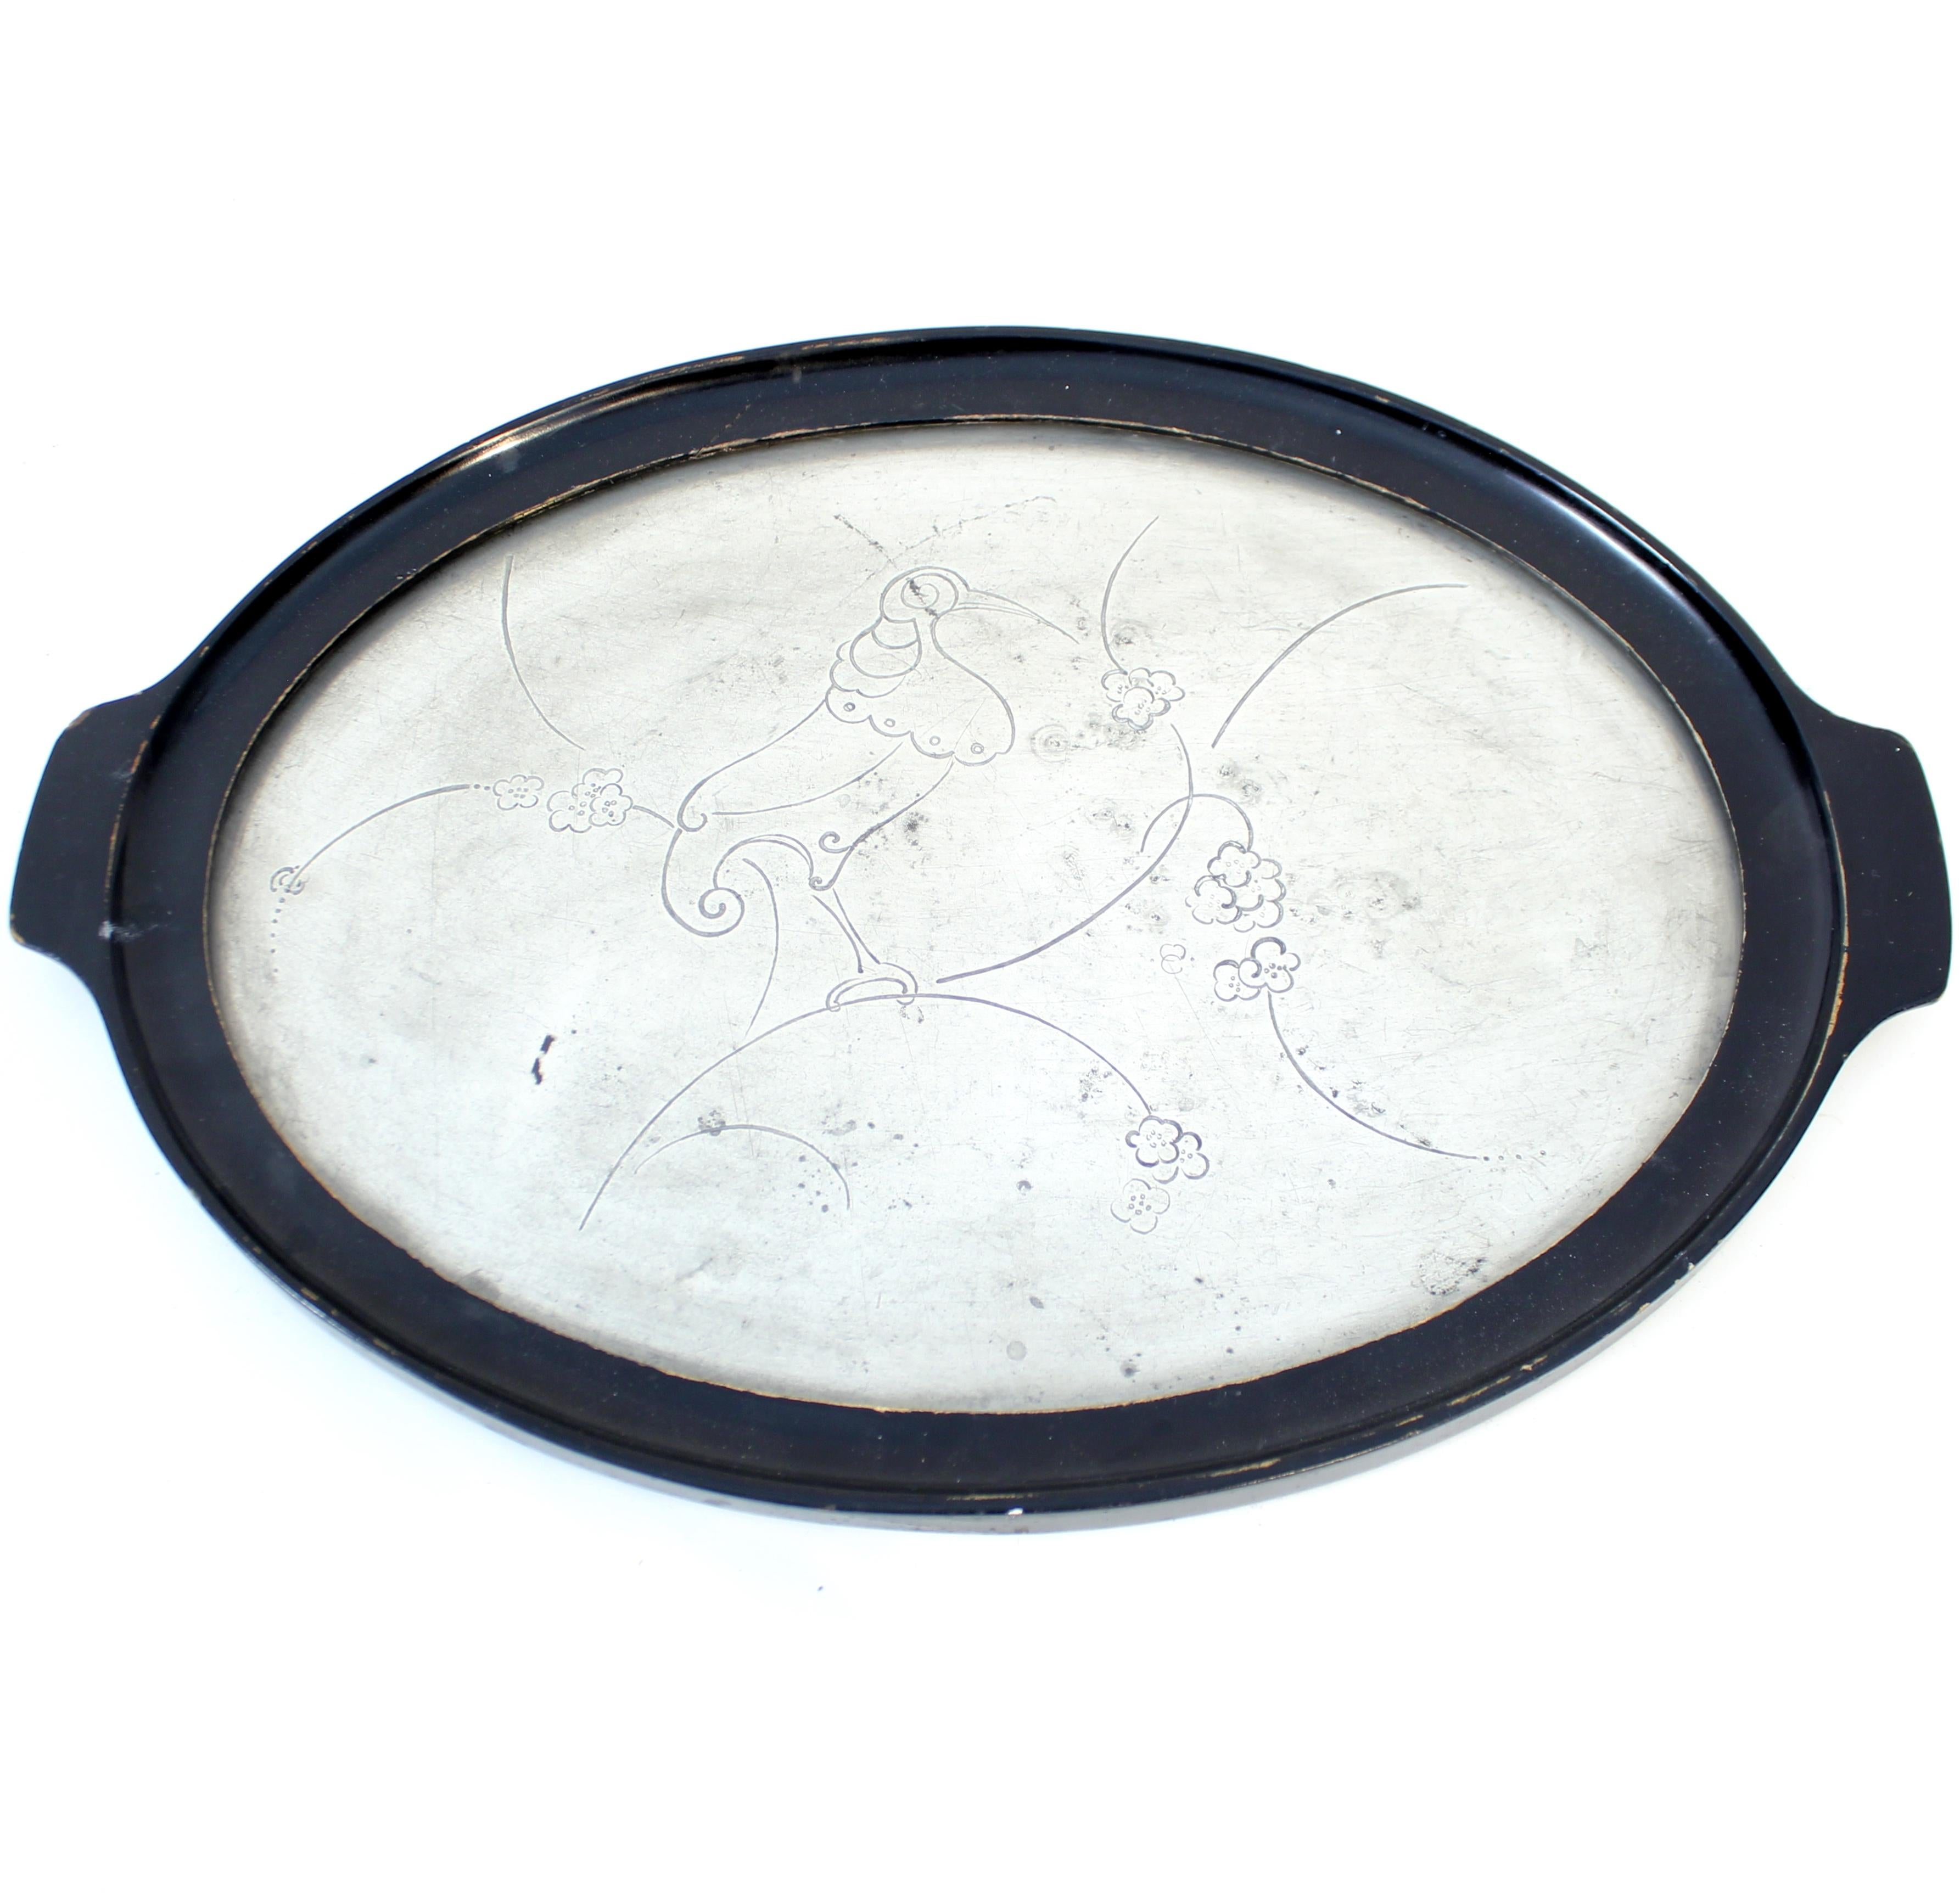 Pewter and ebonized wood tray from the 1930s by unknown maker. Most likely Swedish but for sure Scandinavian. Motif of a bird and some plants. Nice and honest untouched vintage condition with normal patina and ware. 